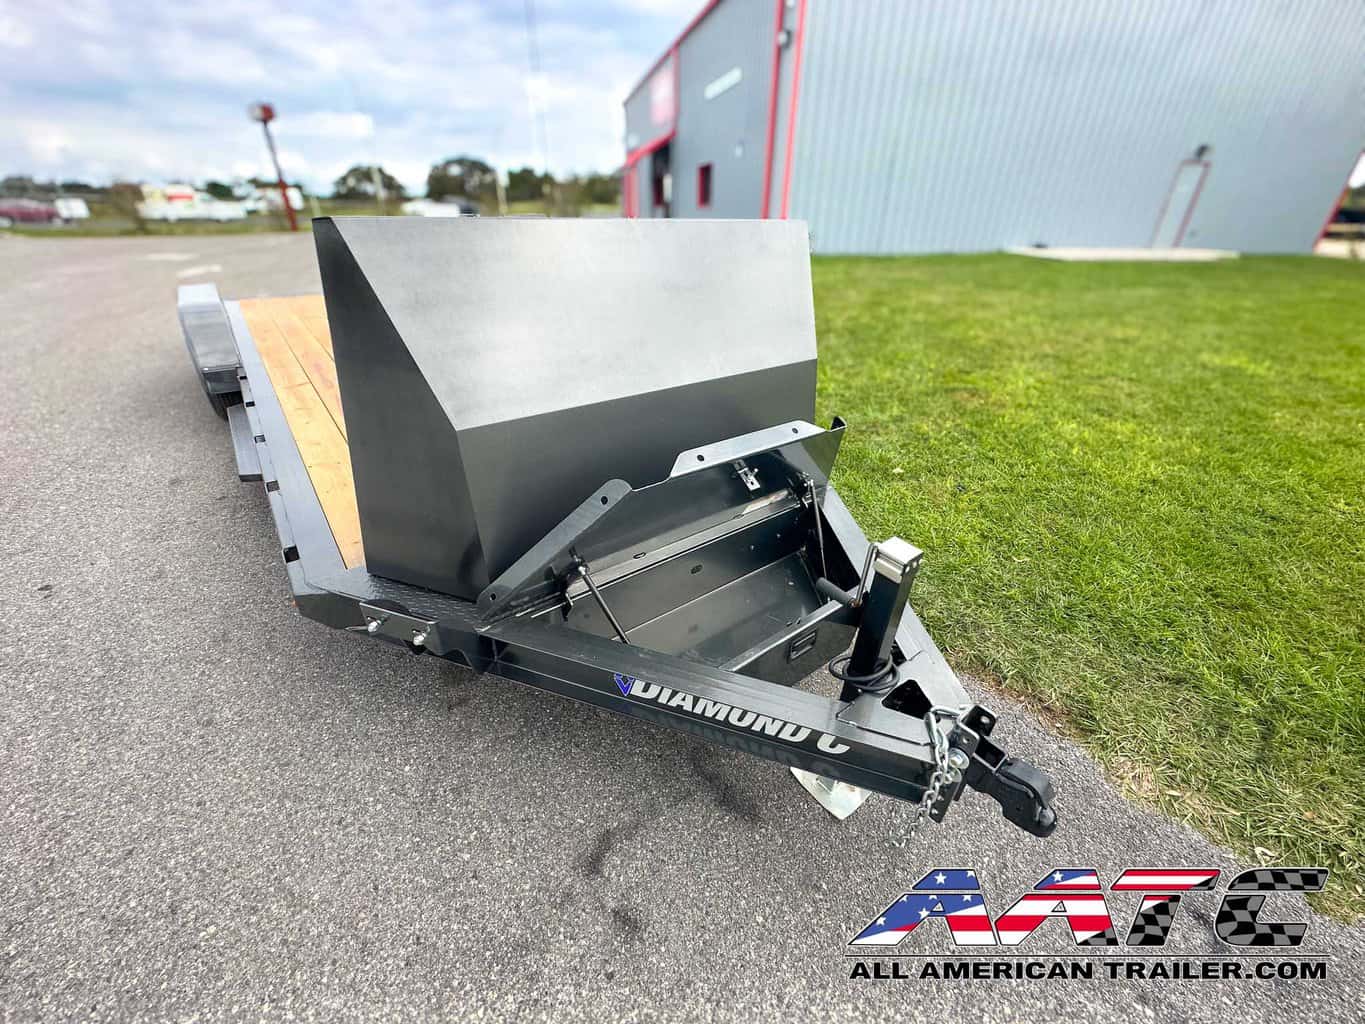 A versatile and durable 20-foot single car hauler from Diamond C, model GTF-18+2. This Diamond C Trailer is designed for open car hauling, with a 7,000 GVWR and 18+2 configuration featuring a steel rock shield and convenient slide-in ramps. The car hauler is 20x7 feet, equipped with electric brakes, a bumper pull design, and a metallic gray finish. It also comes with a 7,000 lb drop-leg jack, LED lights, and an adjustable coupler for added functionality and convenience.